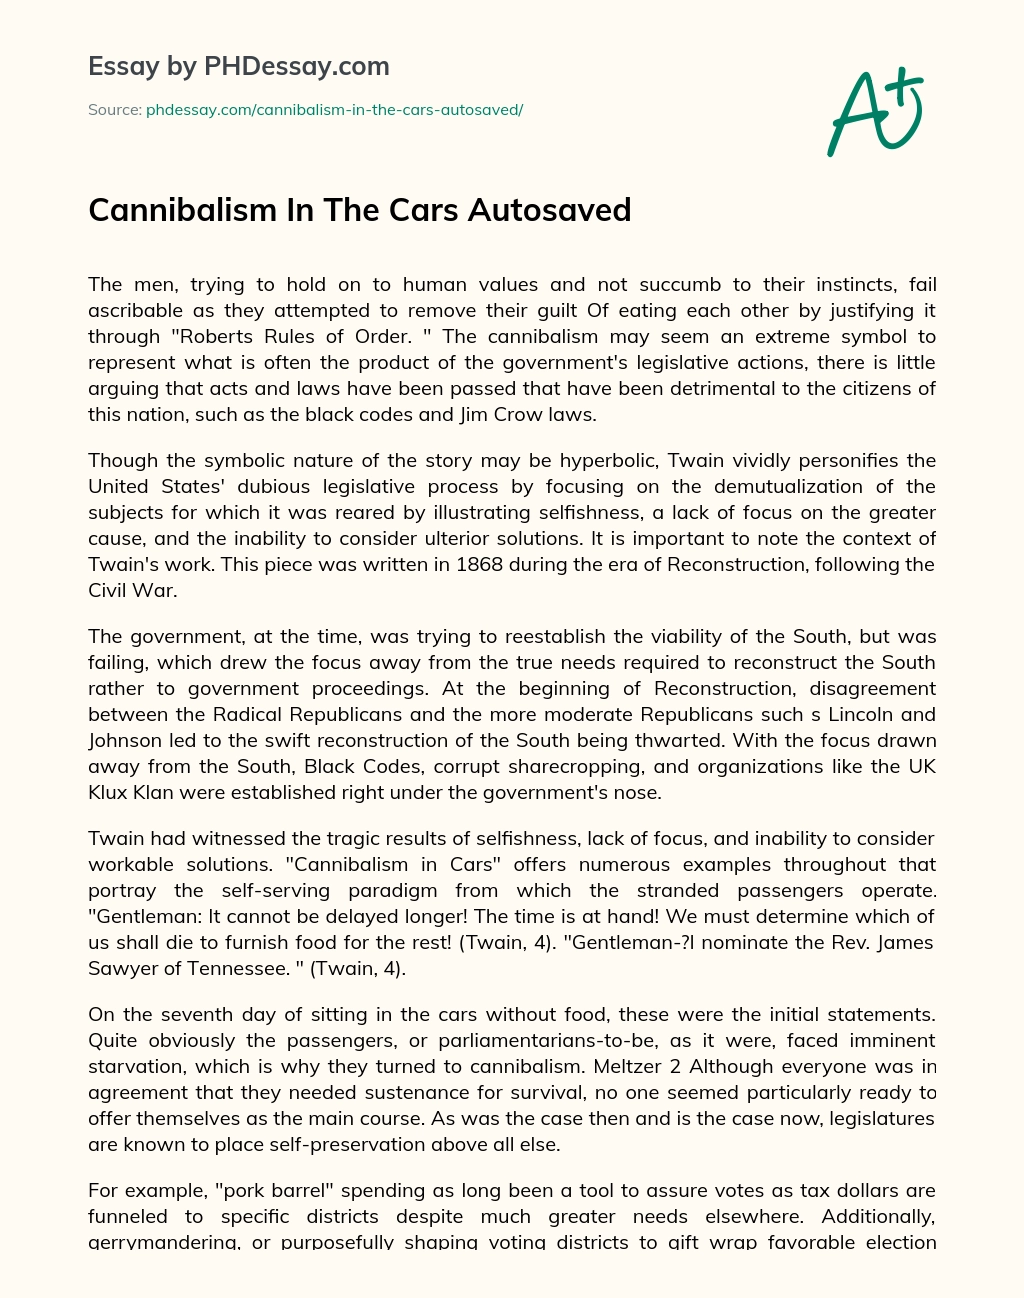 Cannibalism In The Cars Autosaved essay